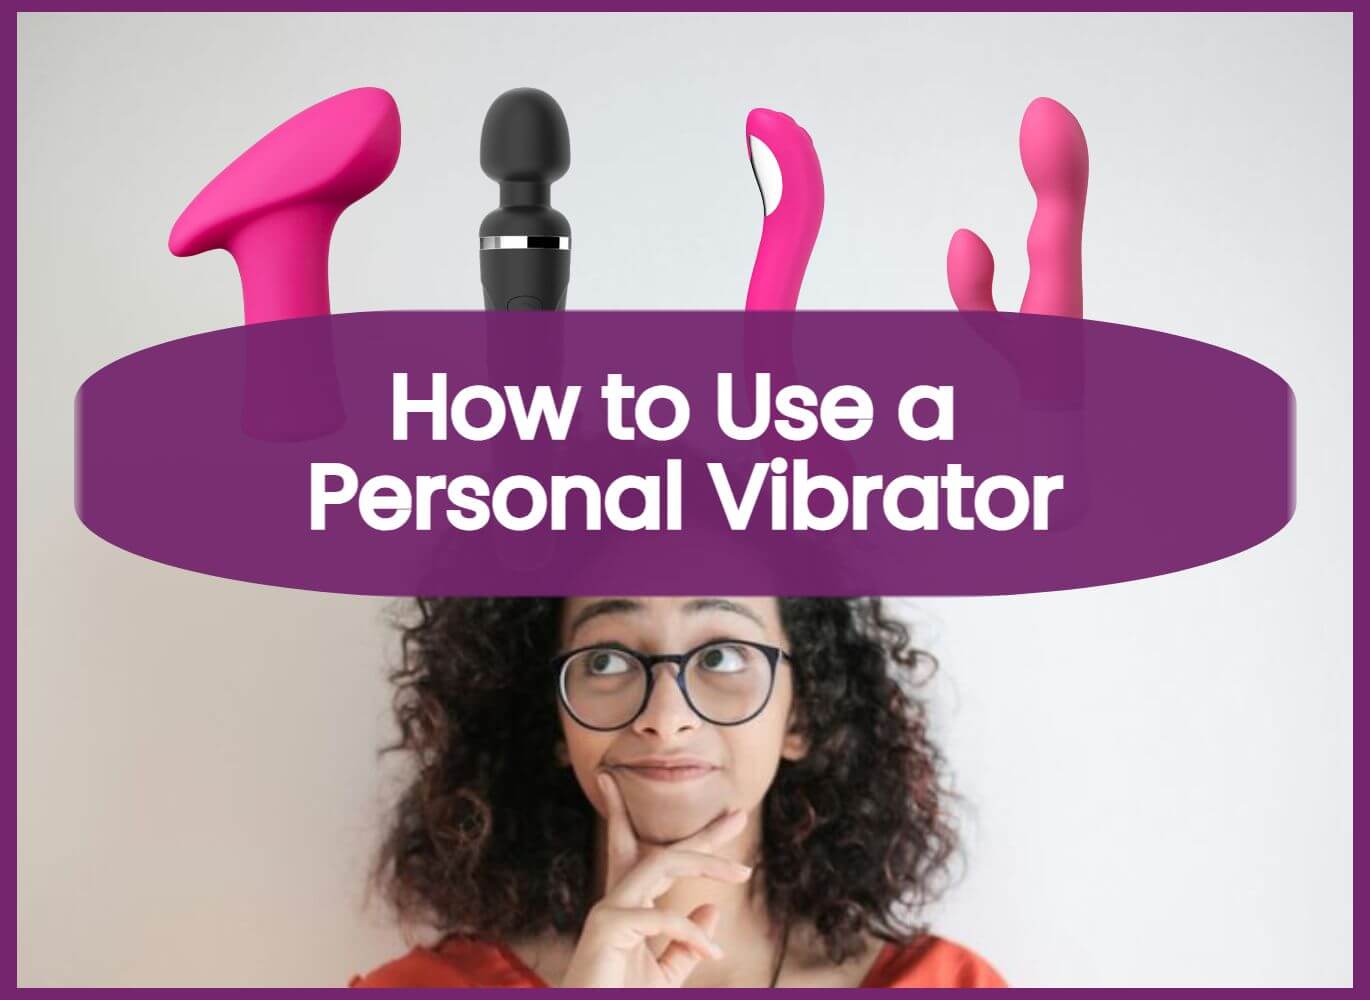 How to Use a Personal Vibrator